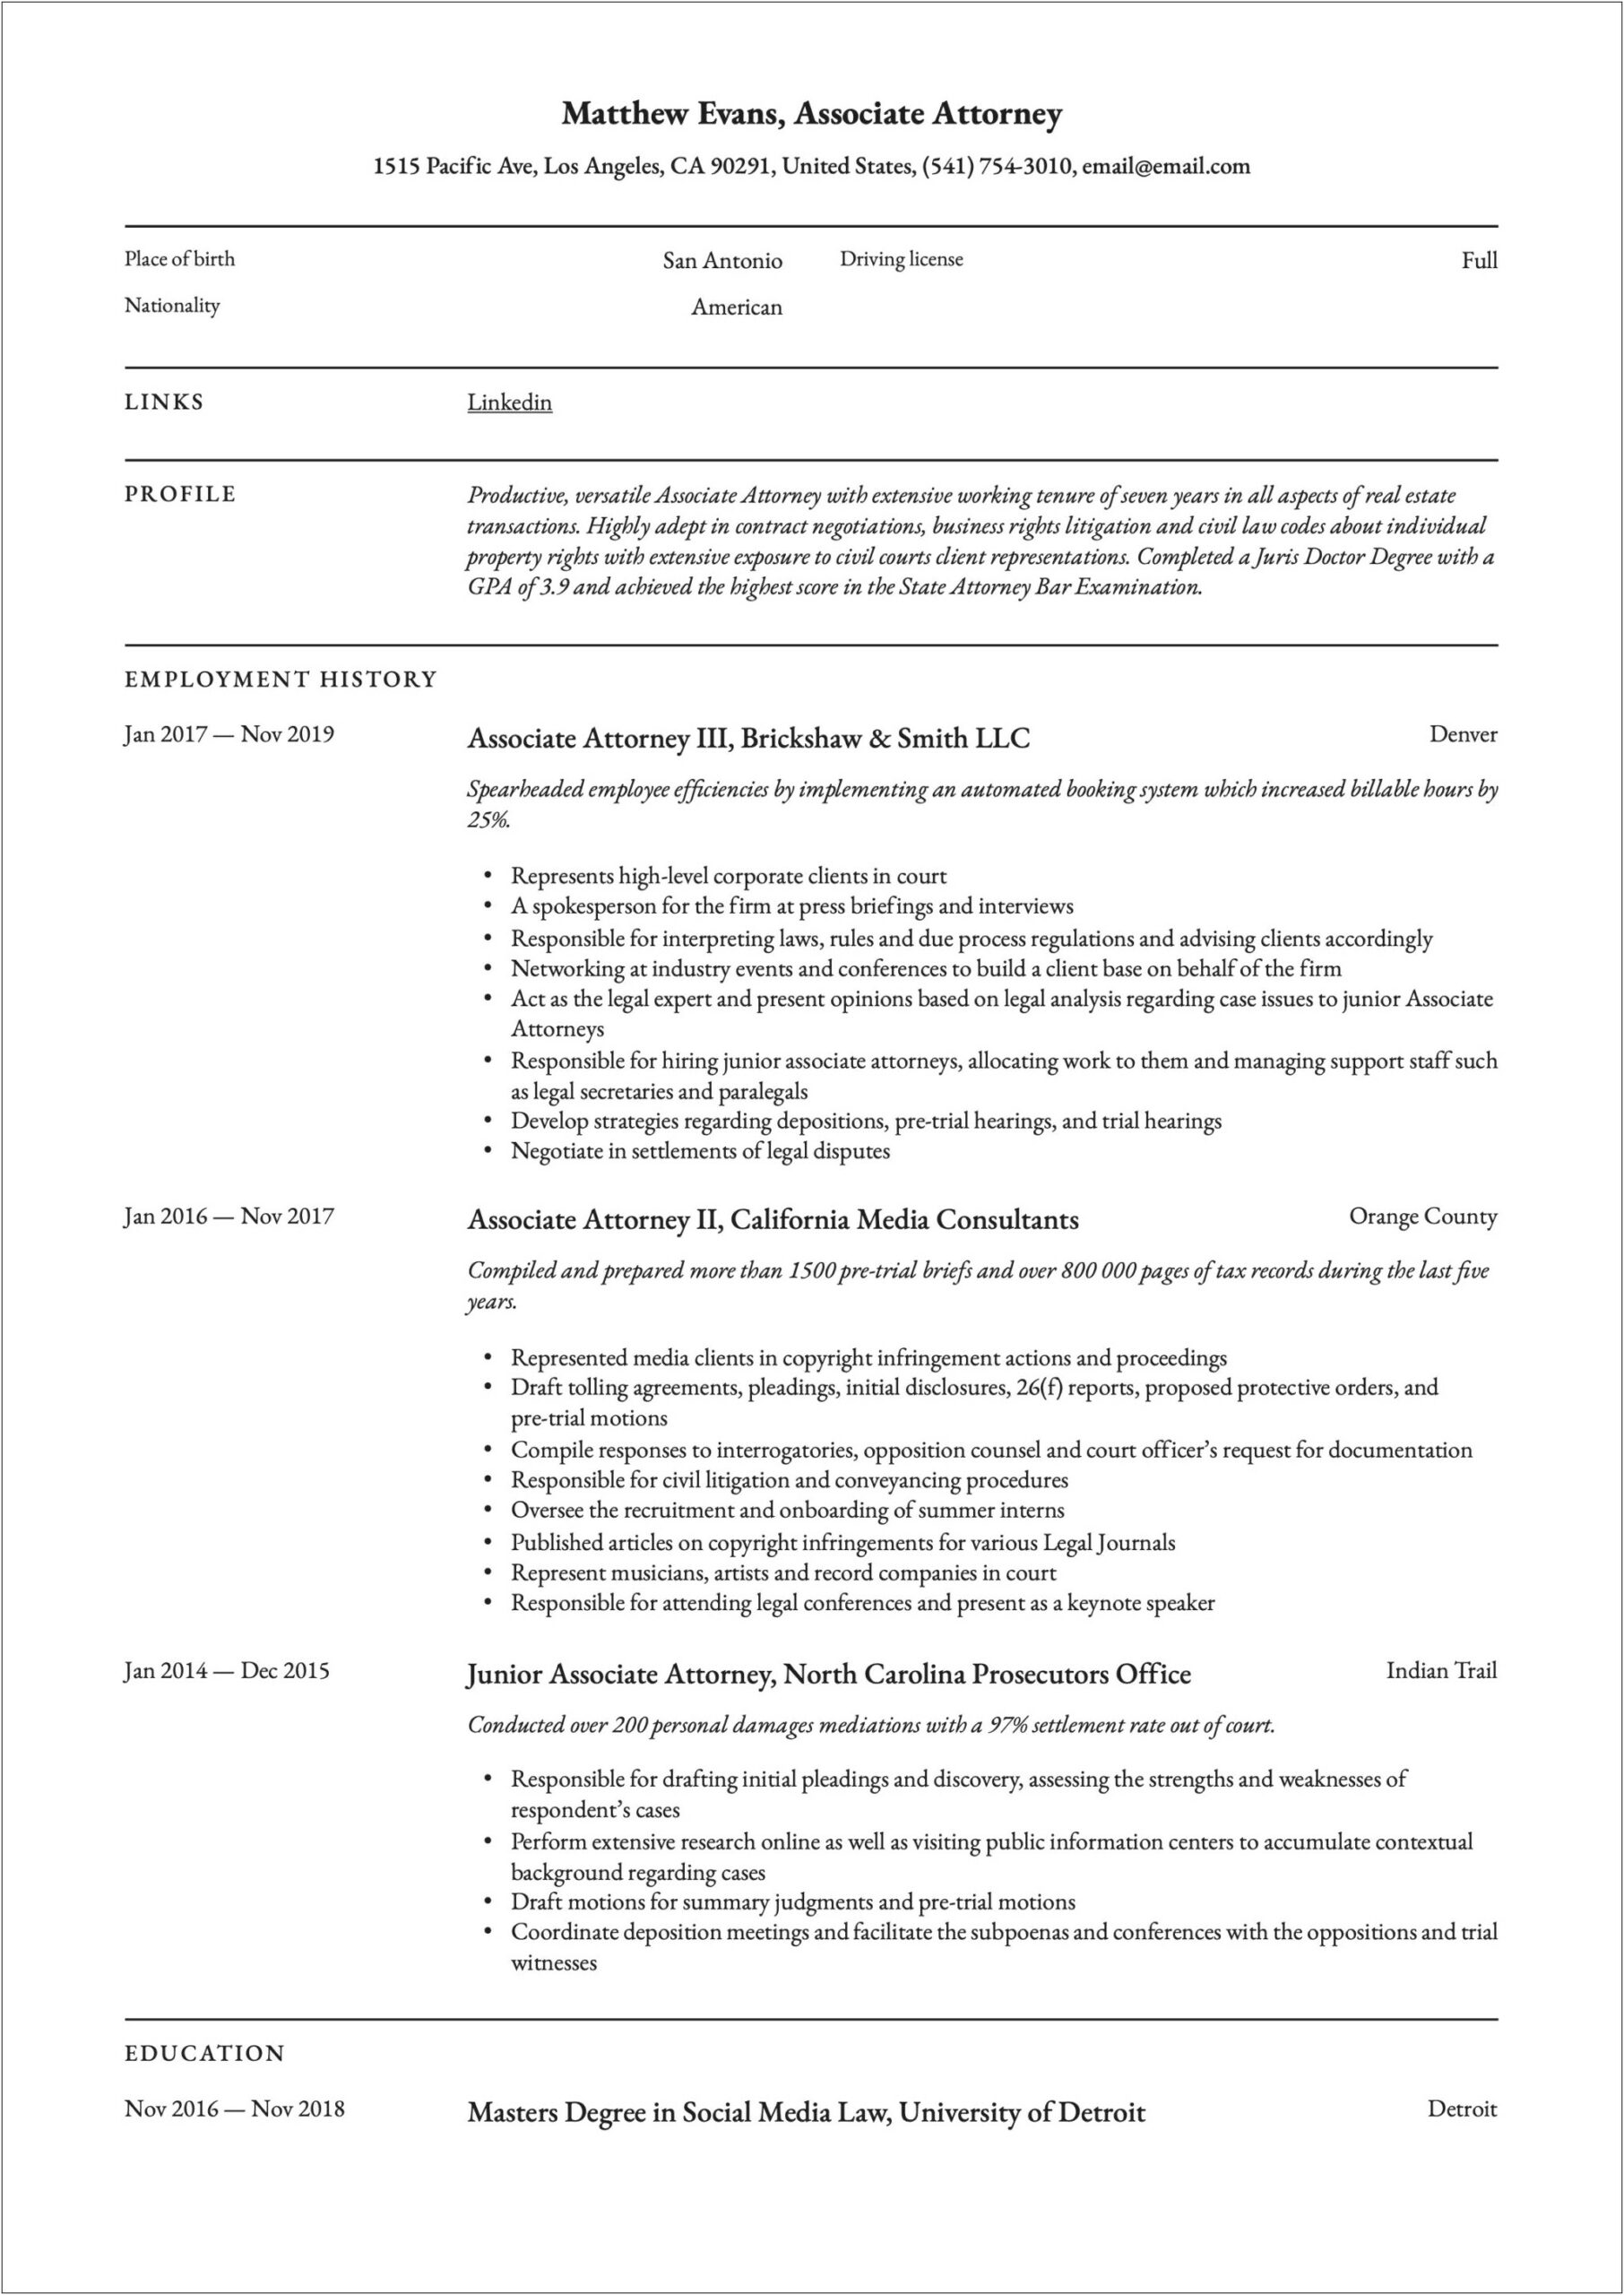 Labor And Employment Attorney Resume Sample